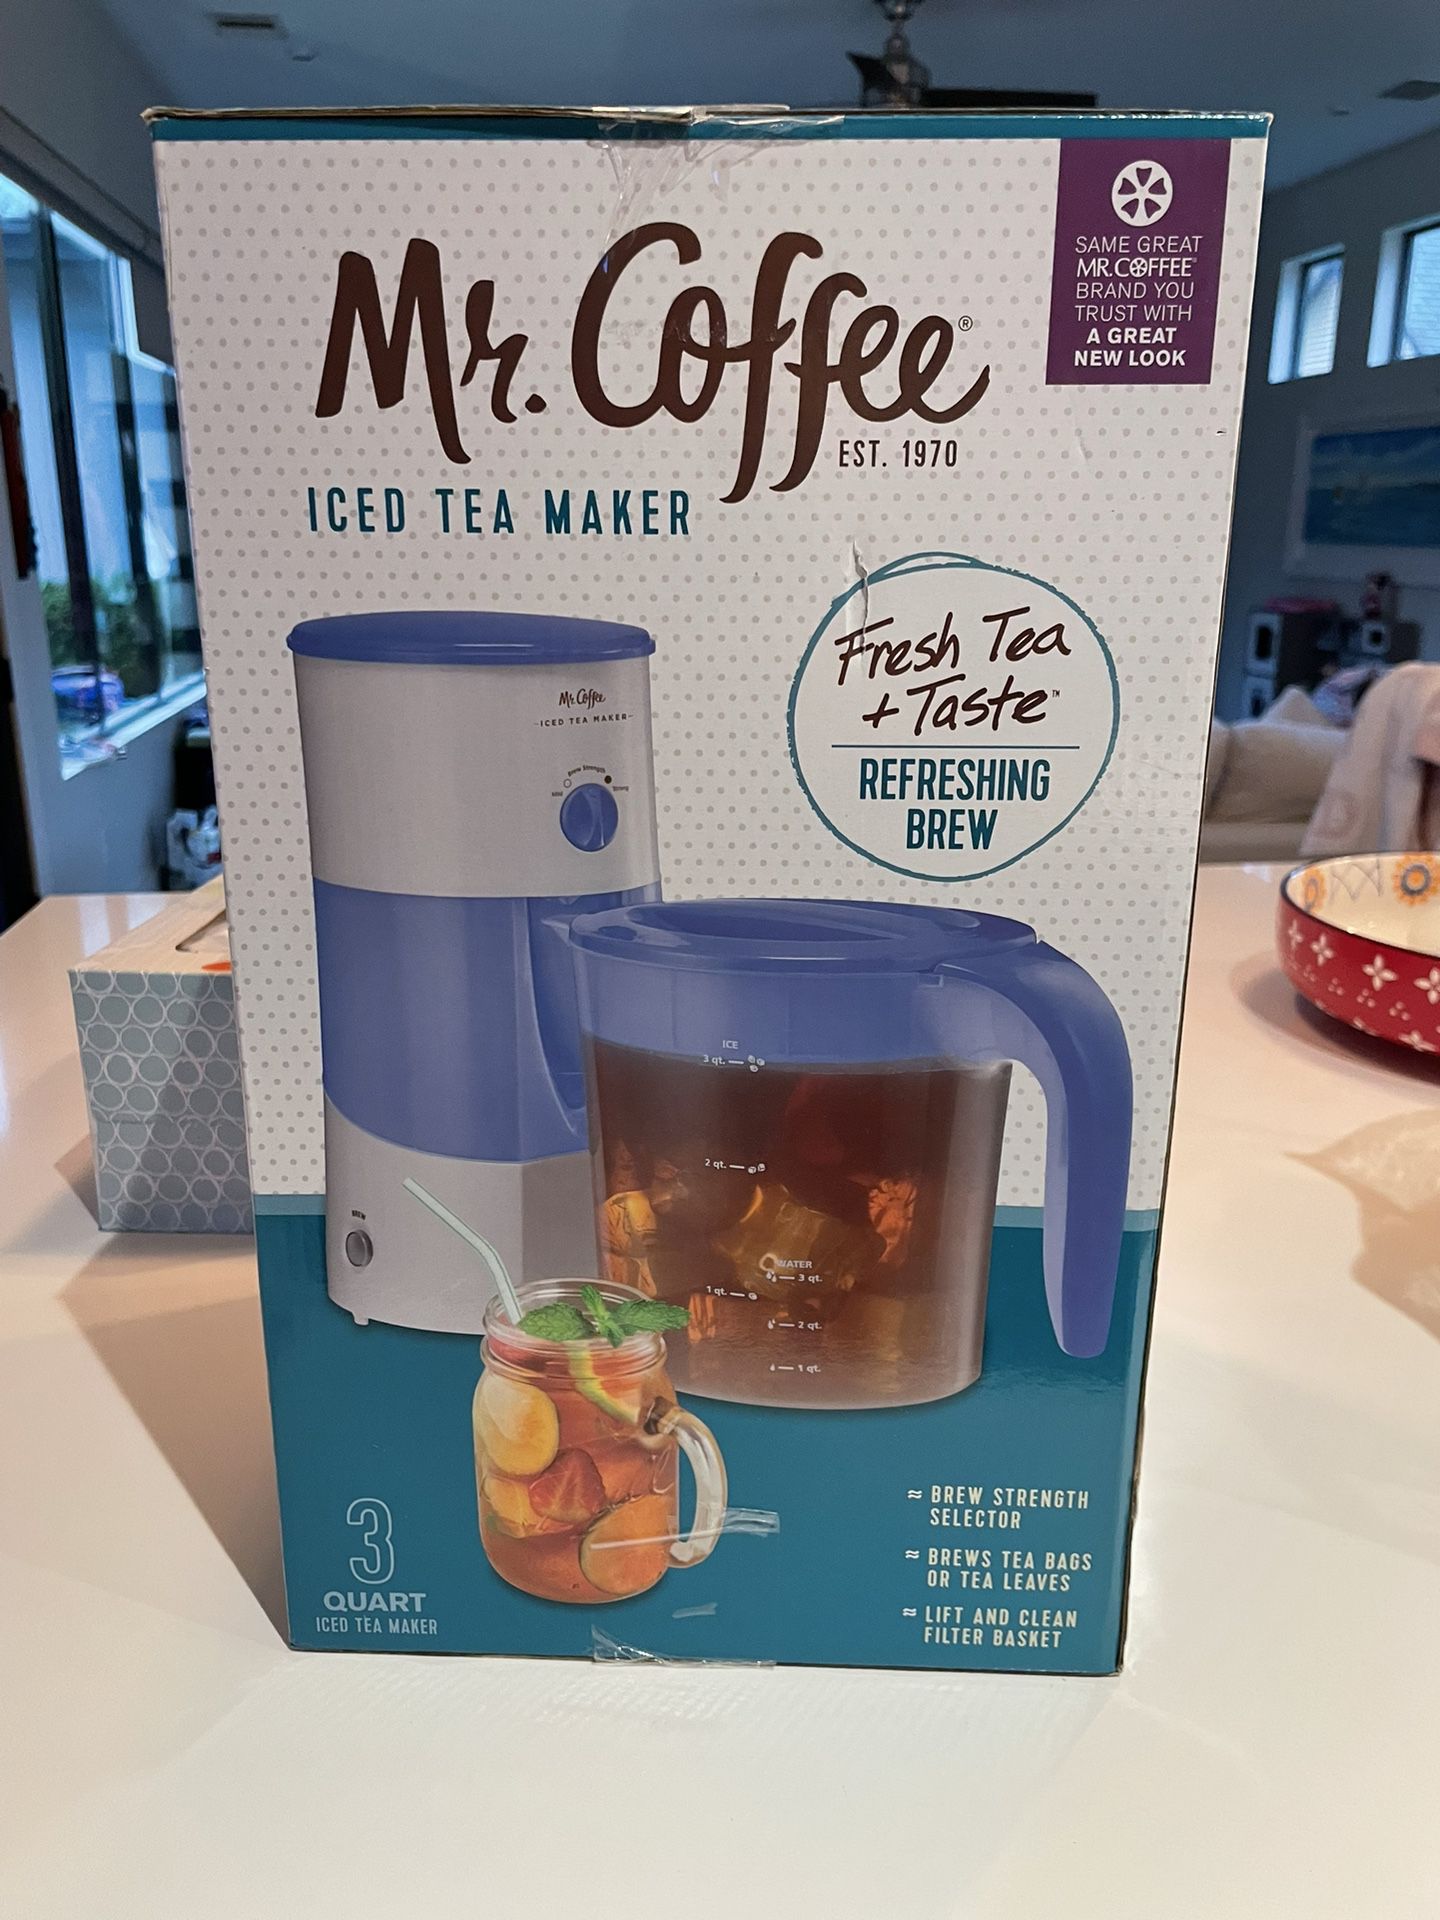 Mr. Coffee TM30P 3-Quart Iced Tea Pot Maker / Bonus Extra Pitcher for Sale  in Knoxville, TN - OfferUp